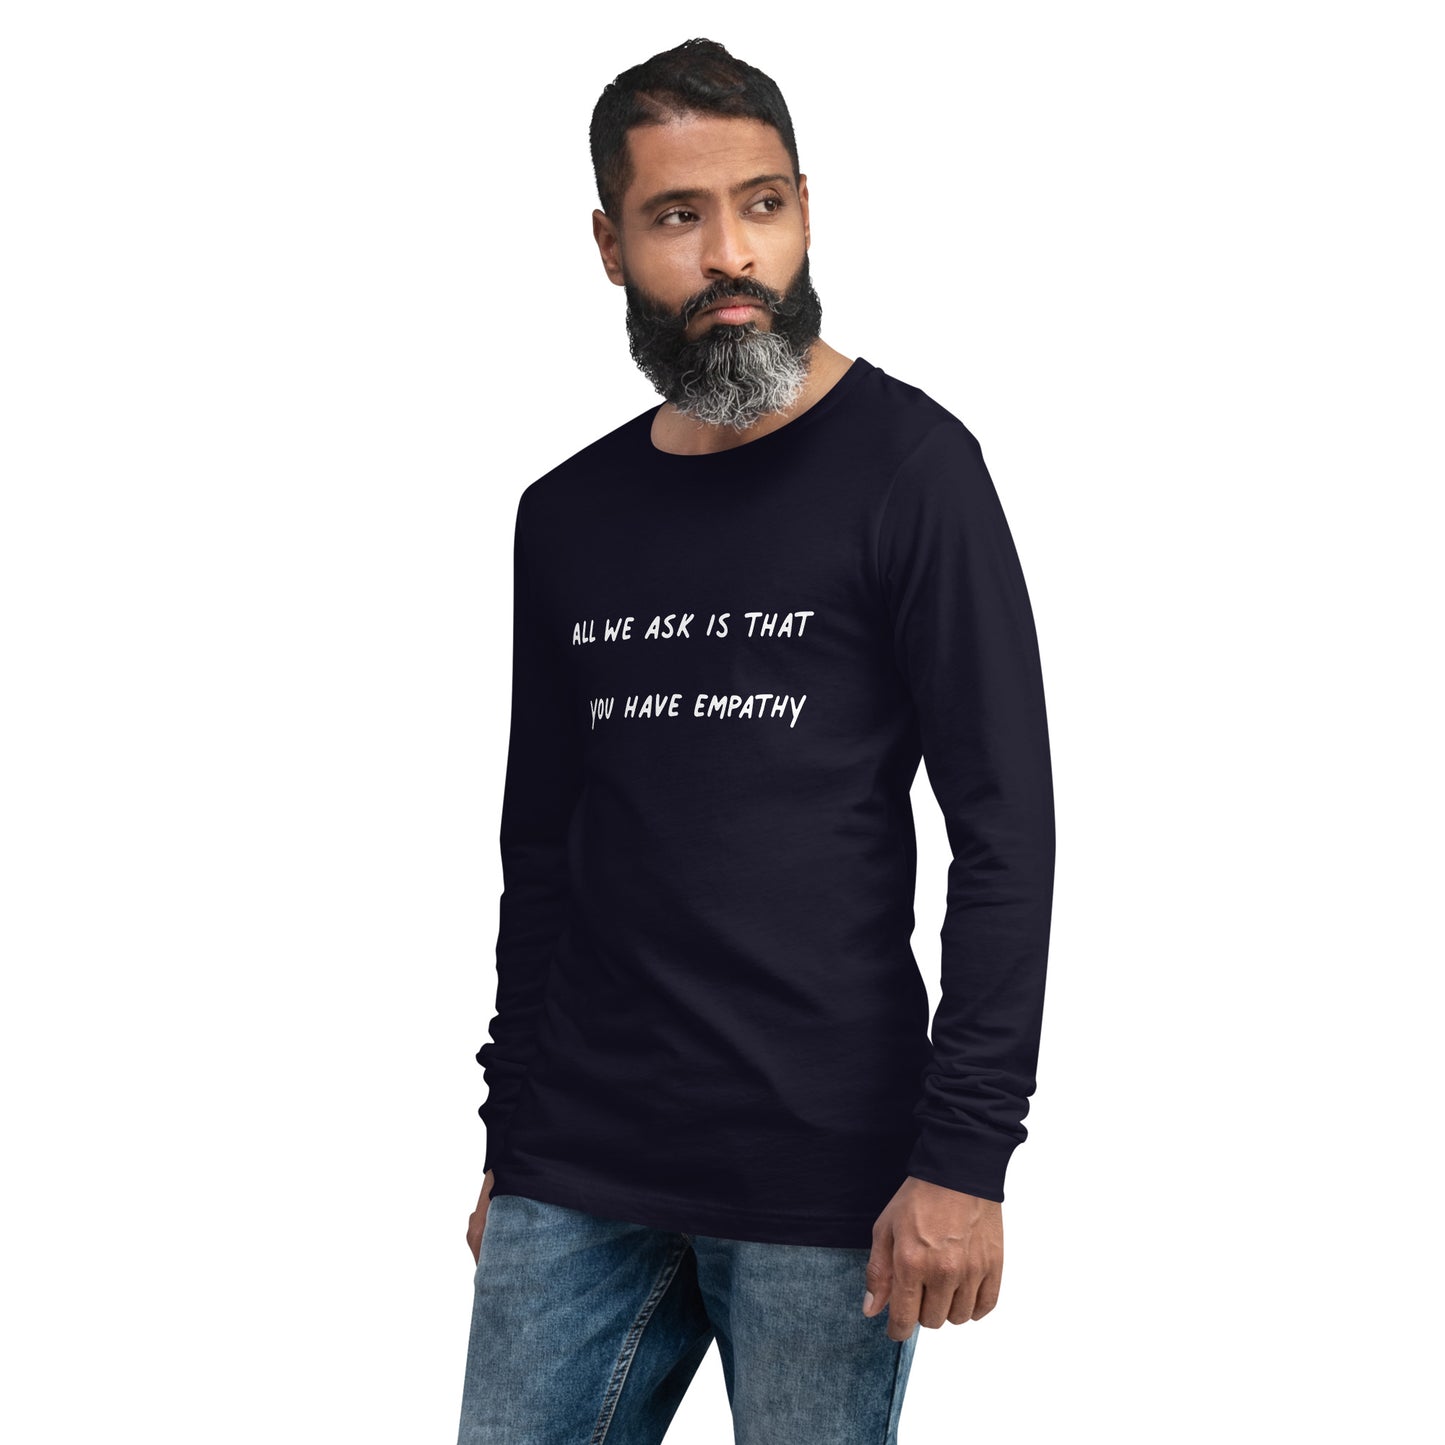 All We Ask Is That You Have Empathy / Chronic Illness Warrior Unisex T-Shirt